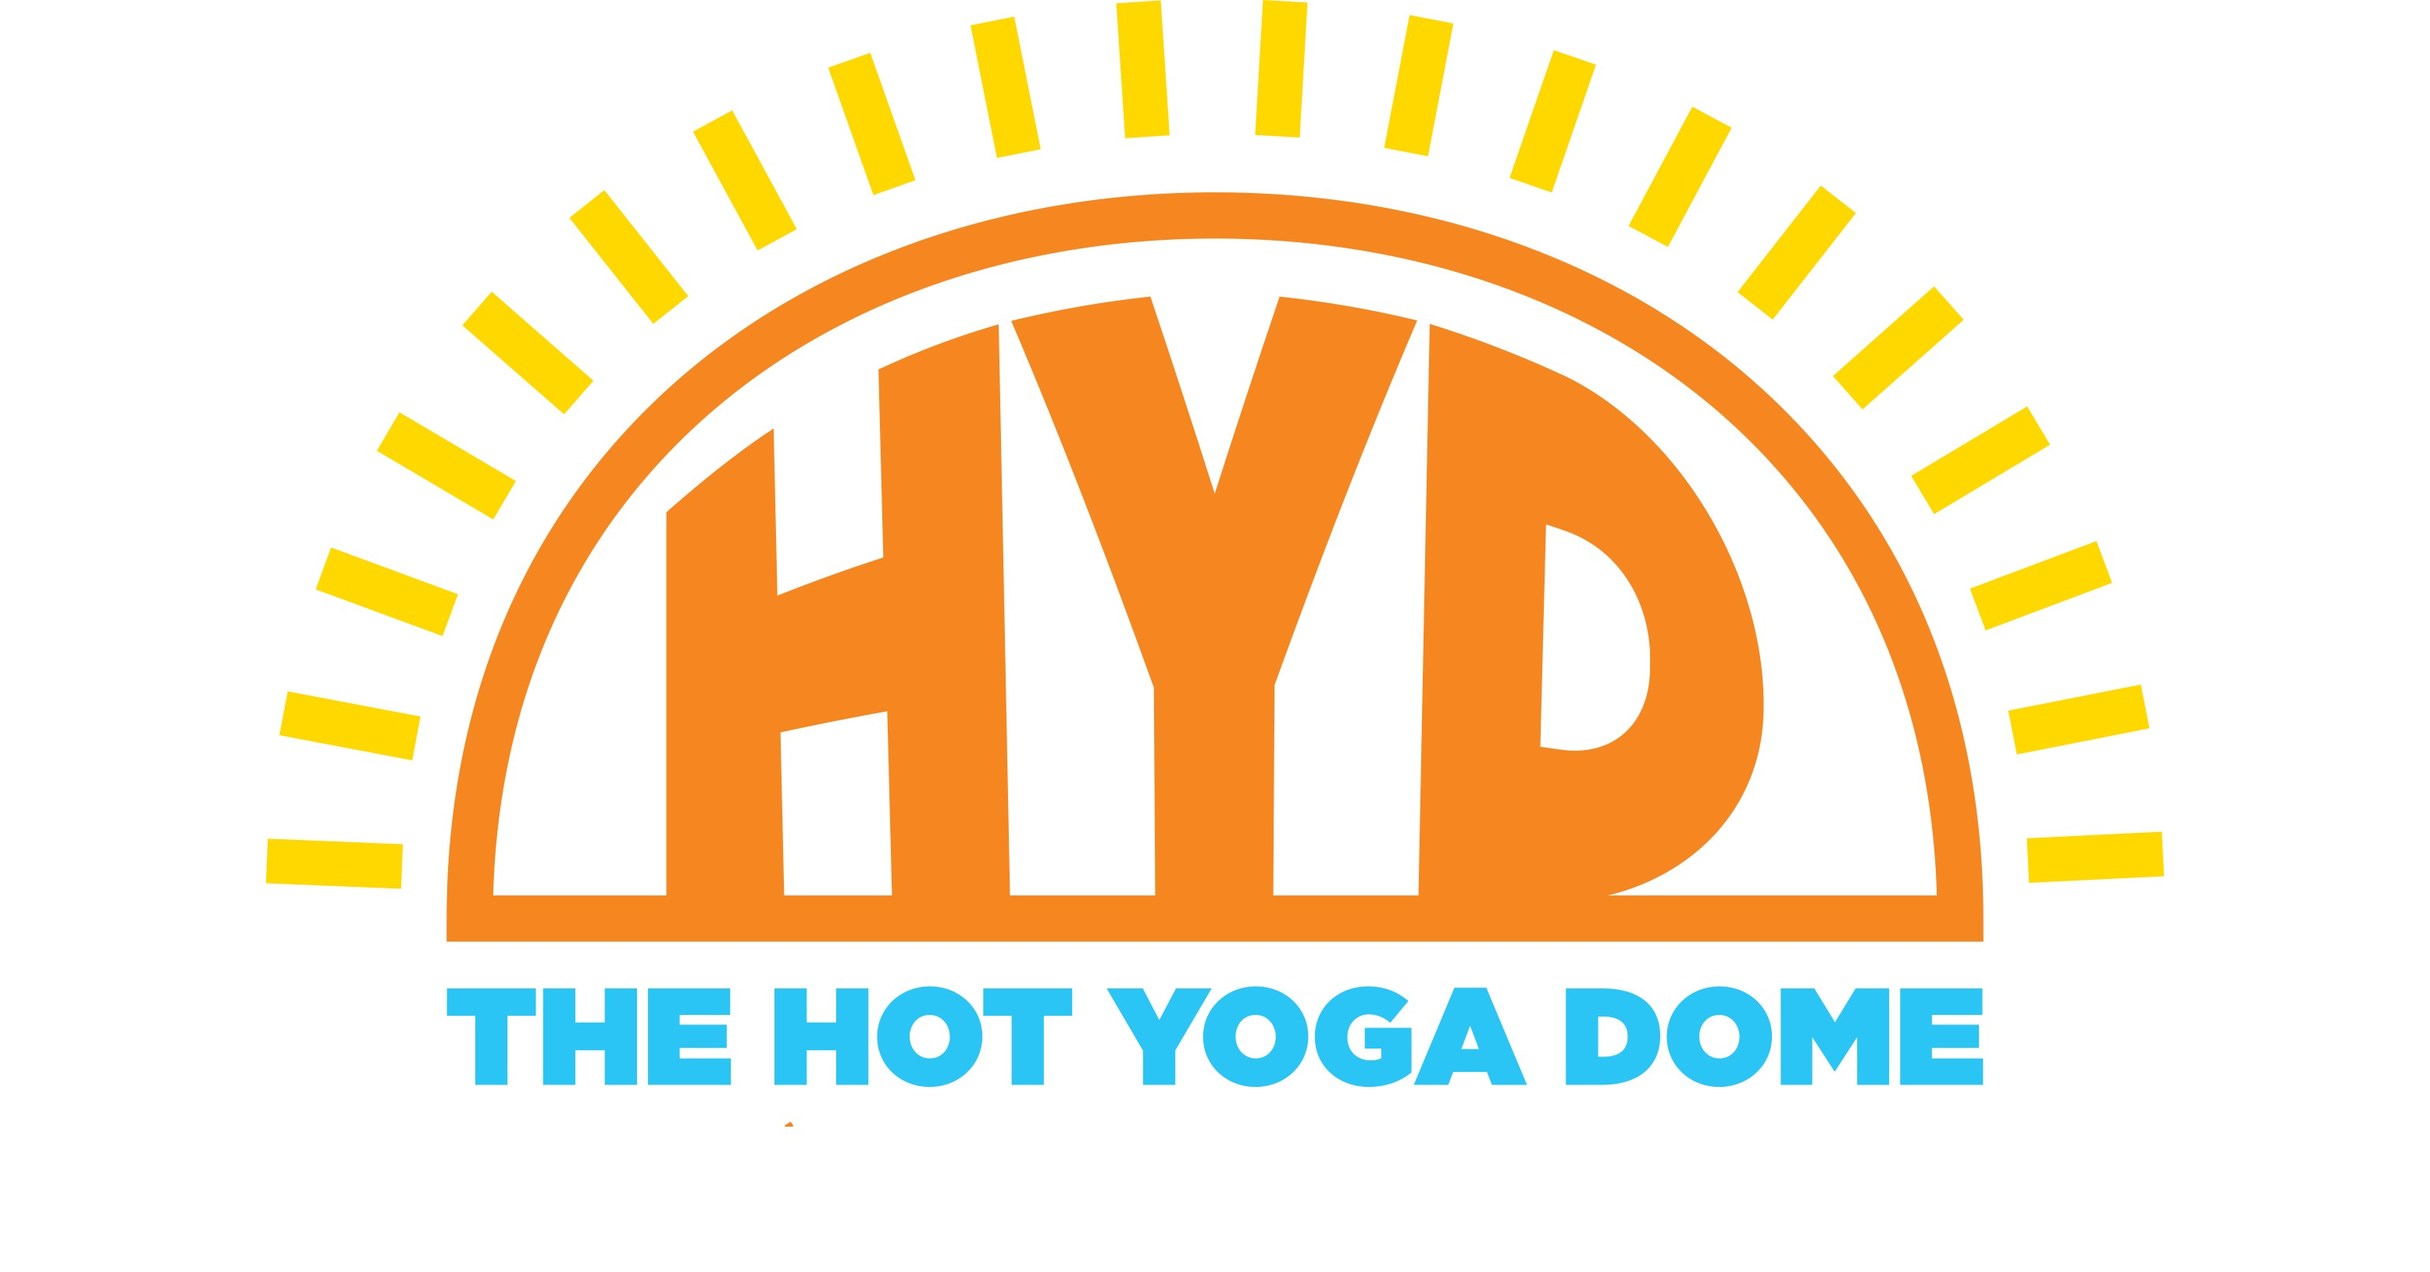 HOT YOGA DOME - Largest Home Dome Made - sporting goods - by owner